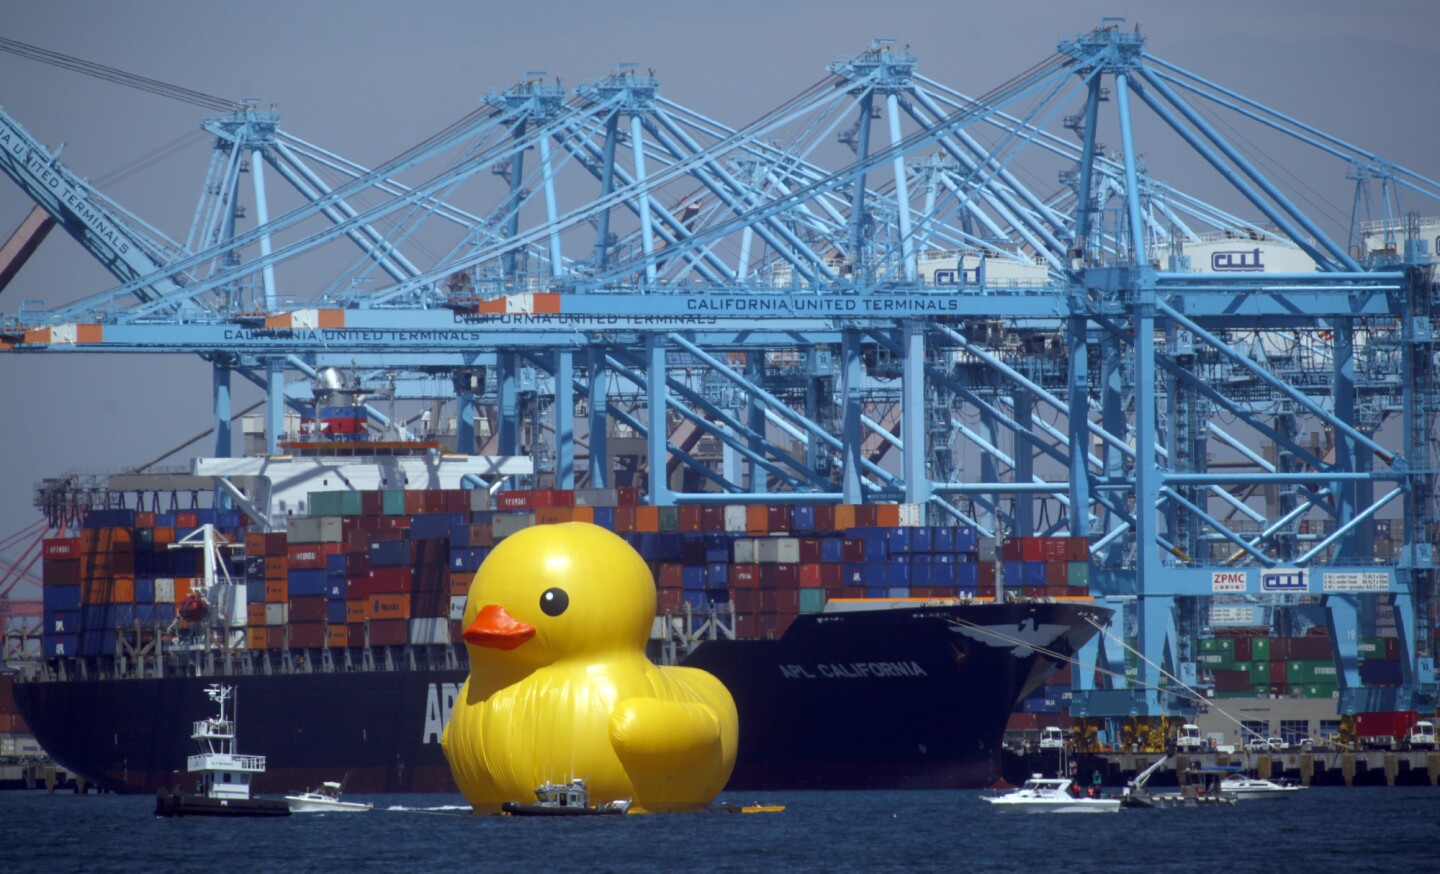 A giant rubber duck passes through the Port of Los Angeles as part of the Festival of Tall Ships.